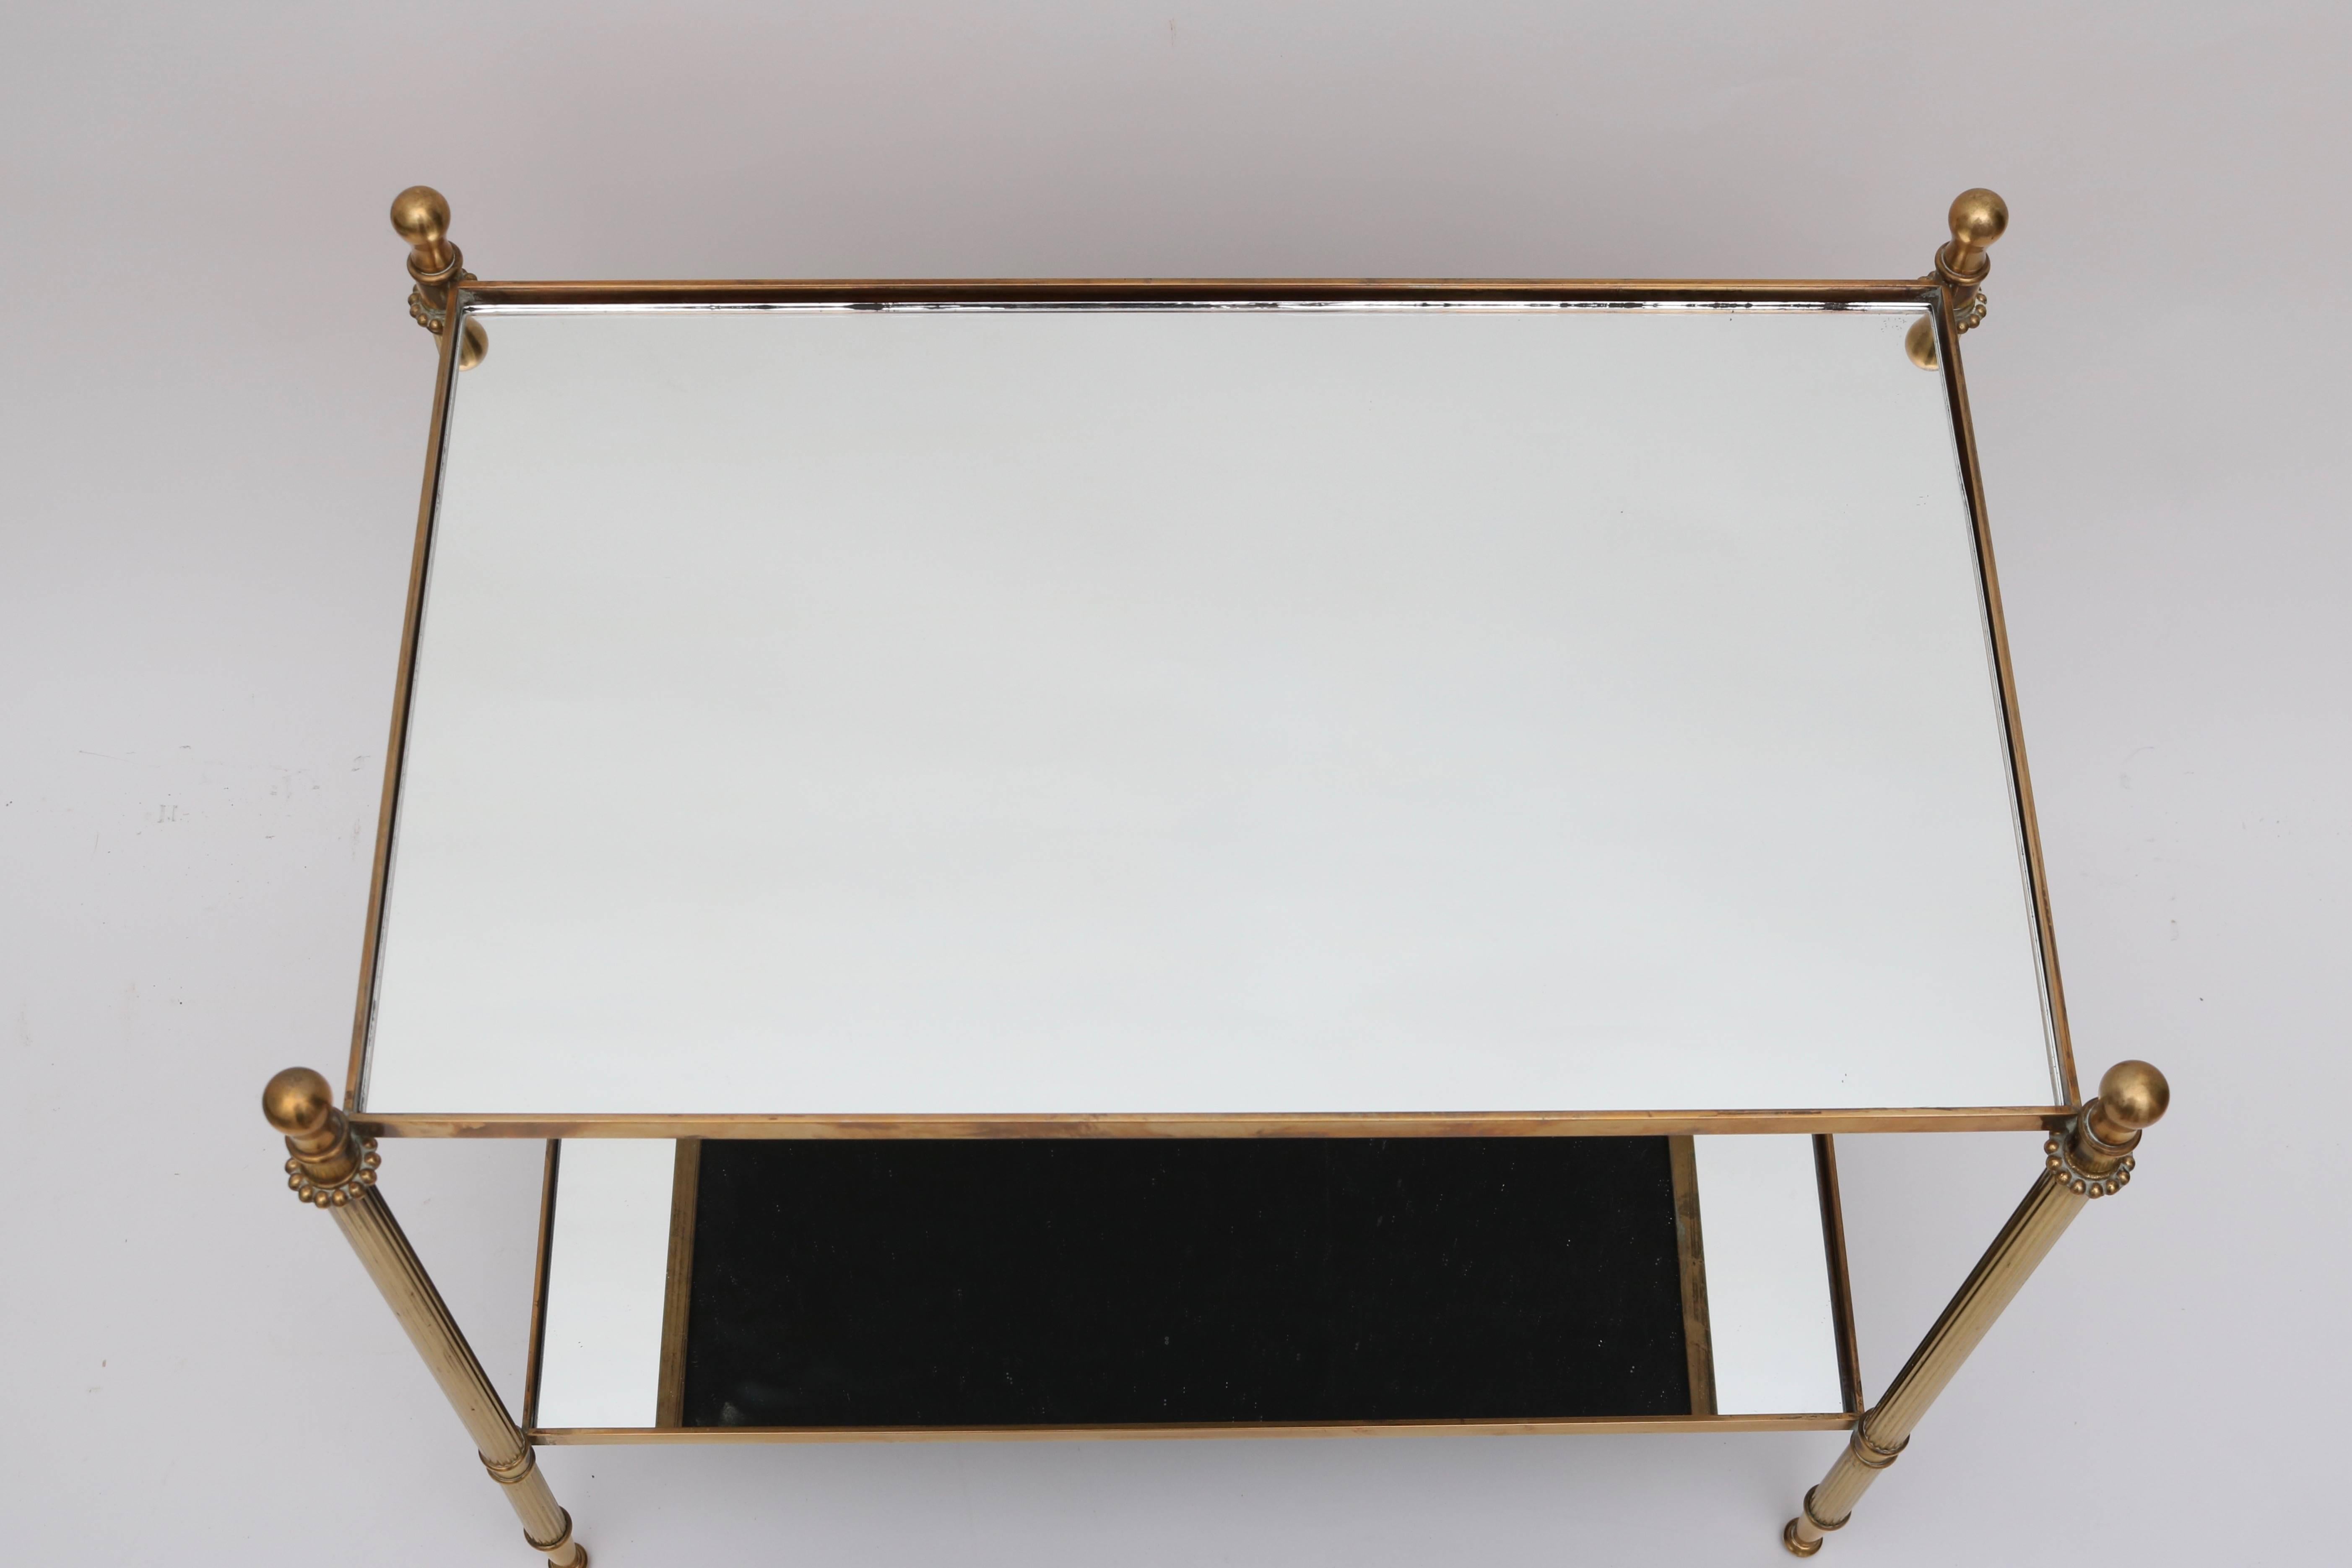 French Pair of Maison Jansen Style Side Tables in Brass and Glass, circa 1930s